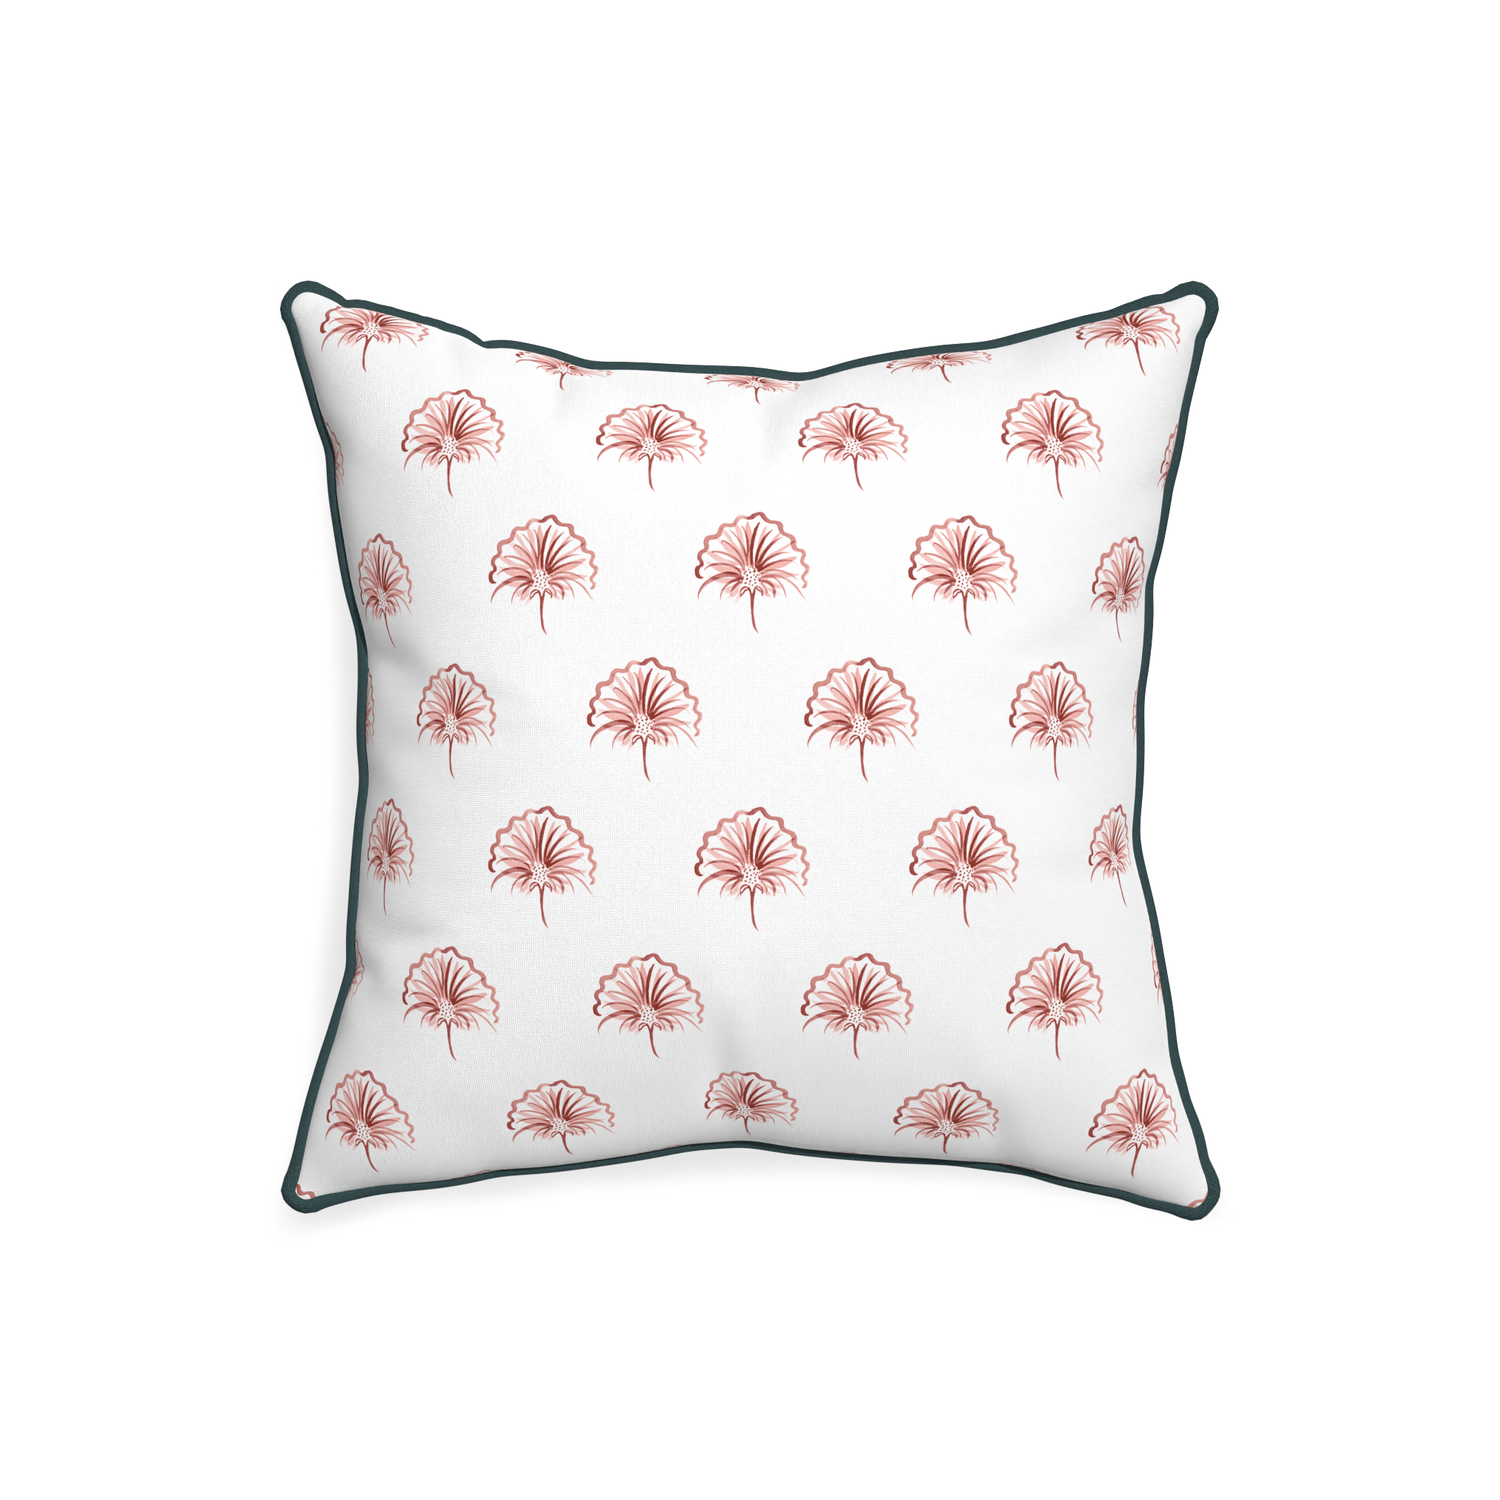 20-square penelope rose custom floral pinkpillow with p piping on white background